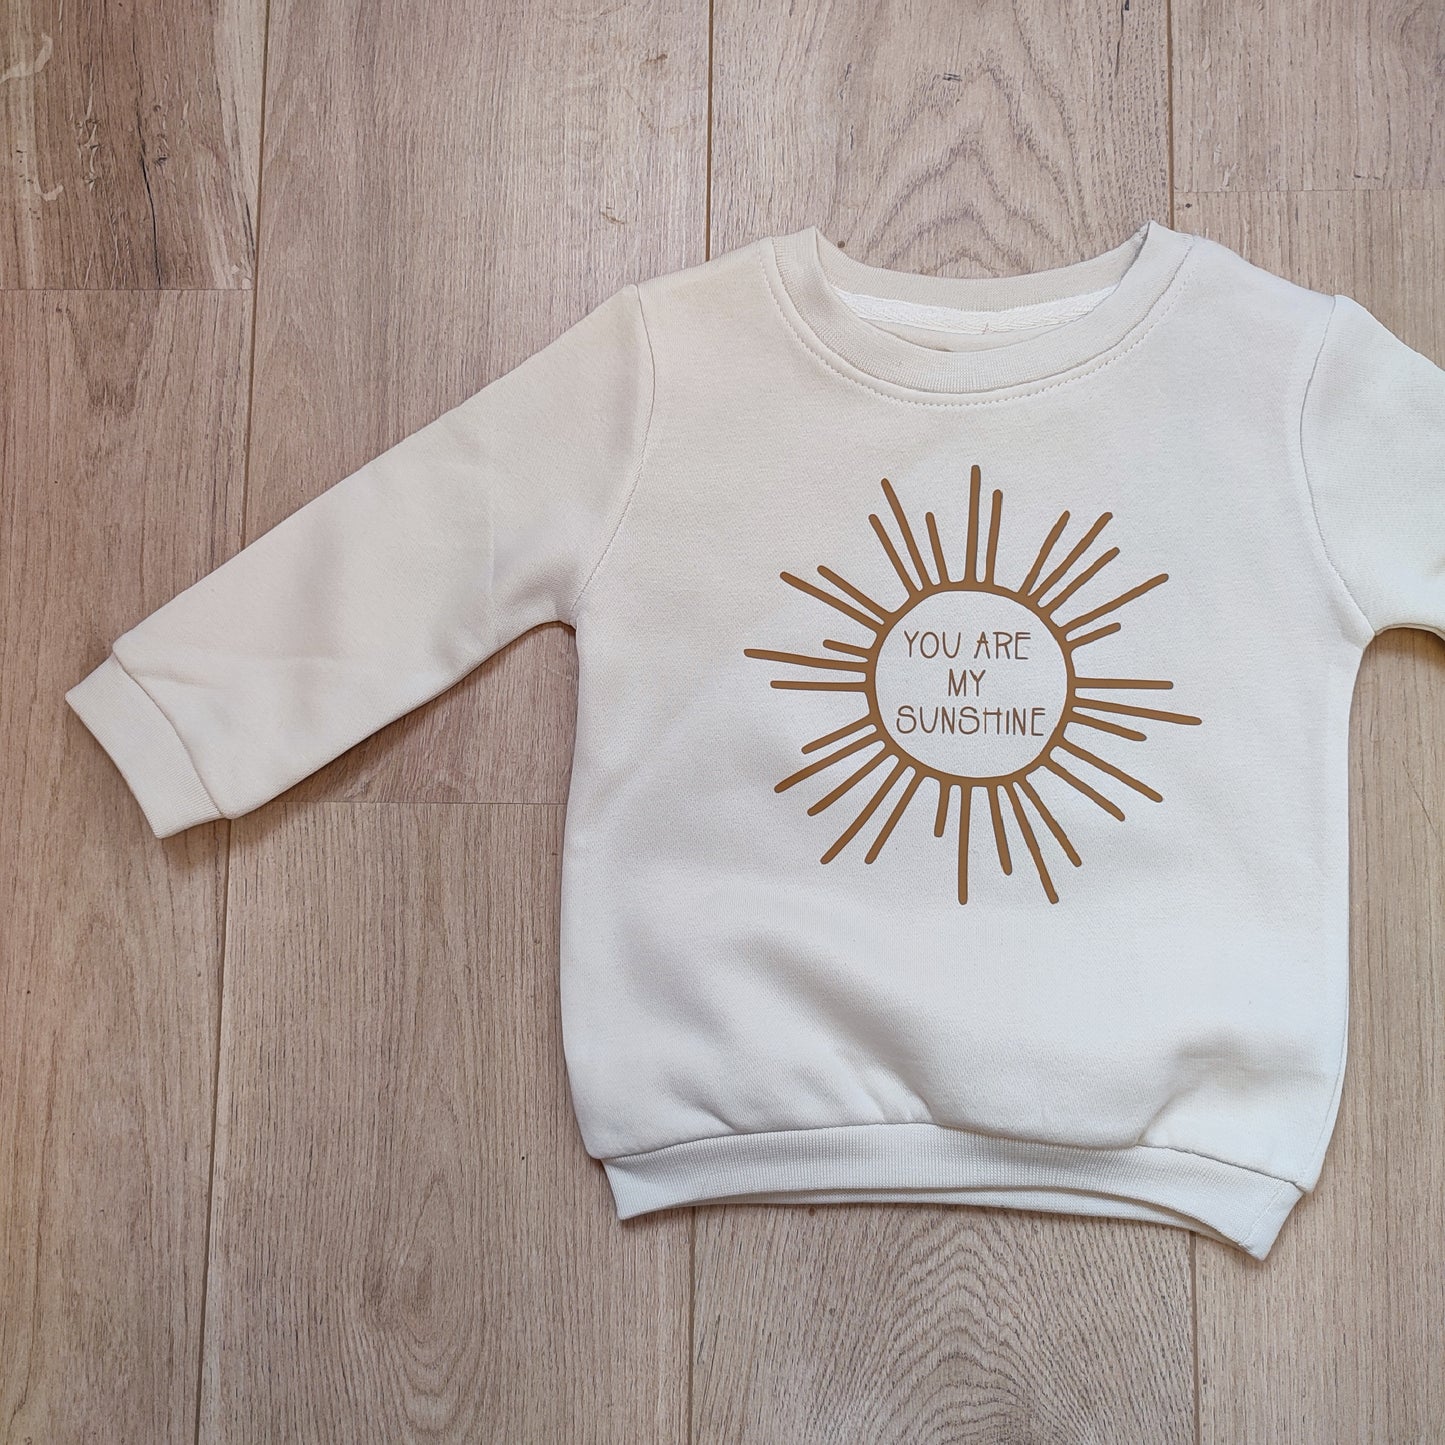 Sweater "you are my sunshine"